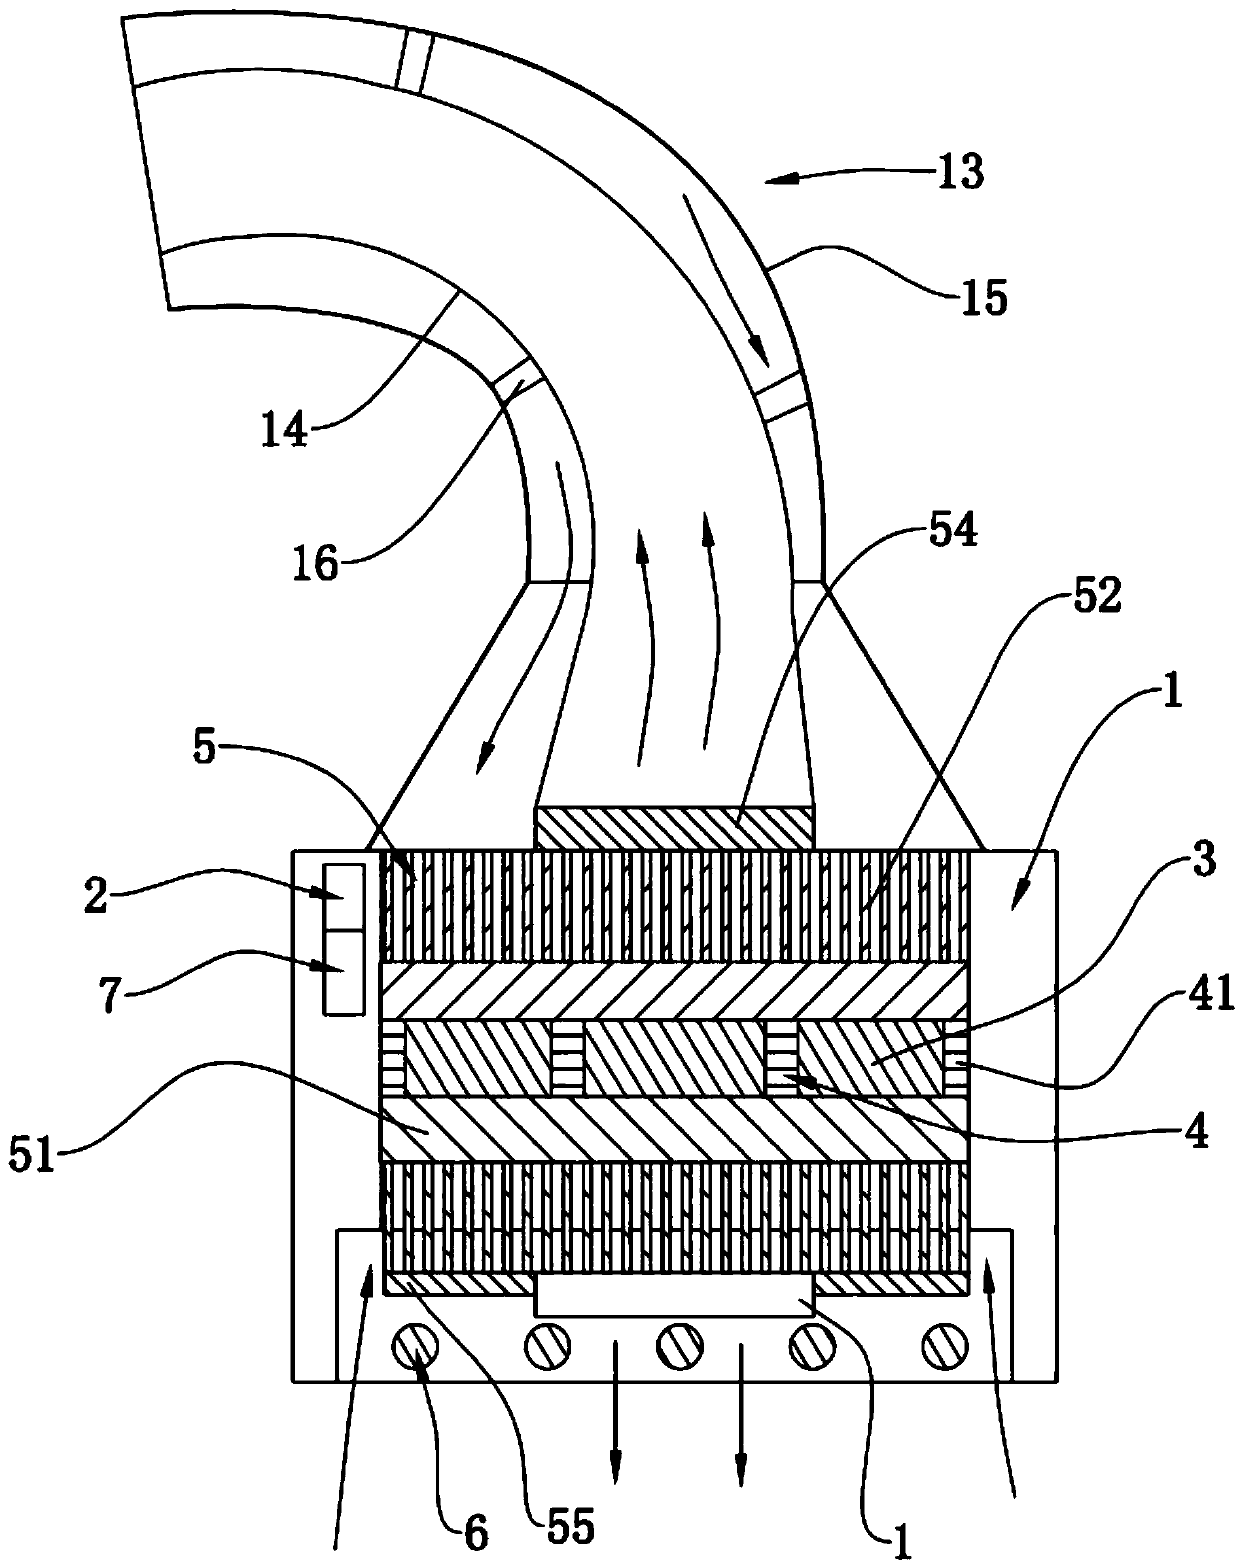 Temperature adjusting system for closed space